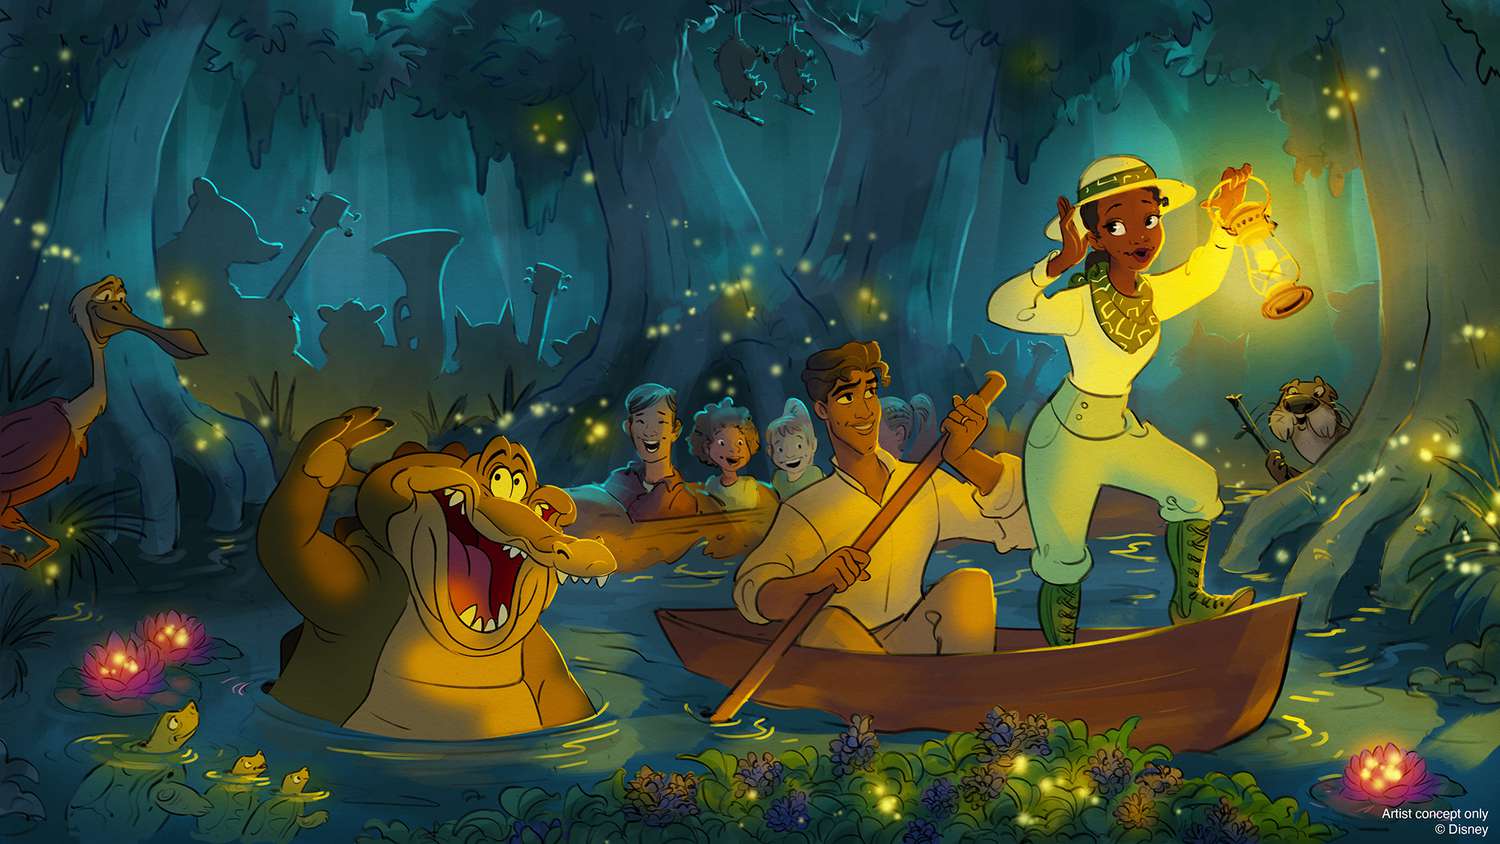 Disney Shares Update on Splash Mountain’s Princess and the Frog Reimagining